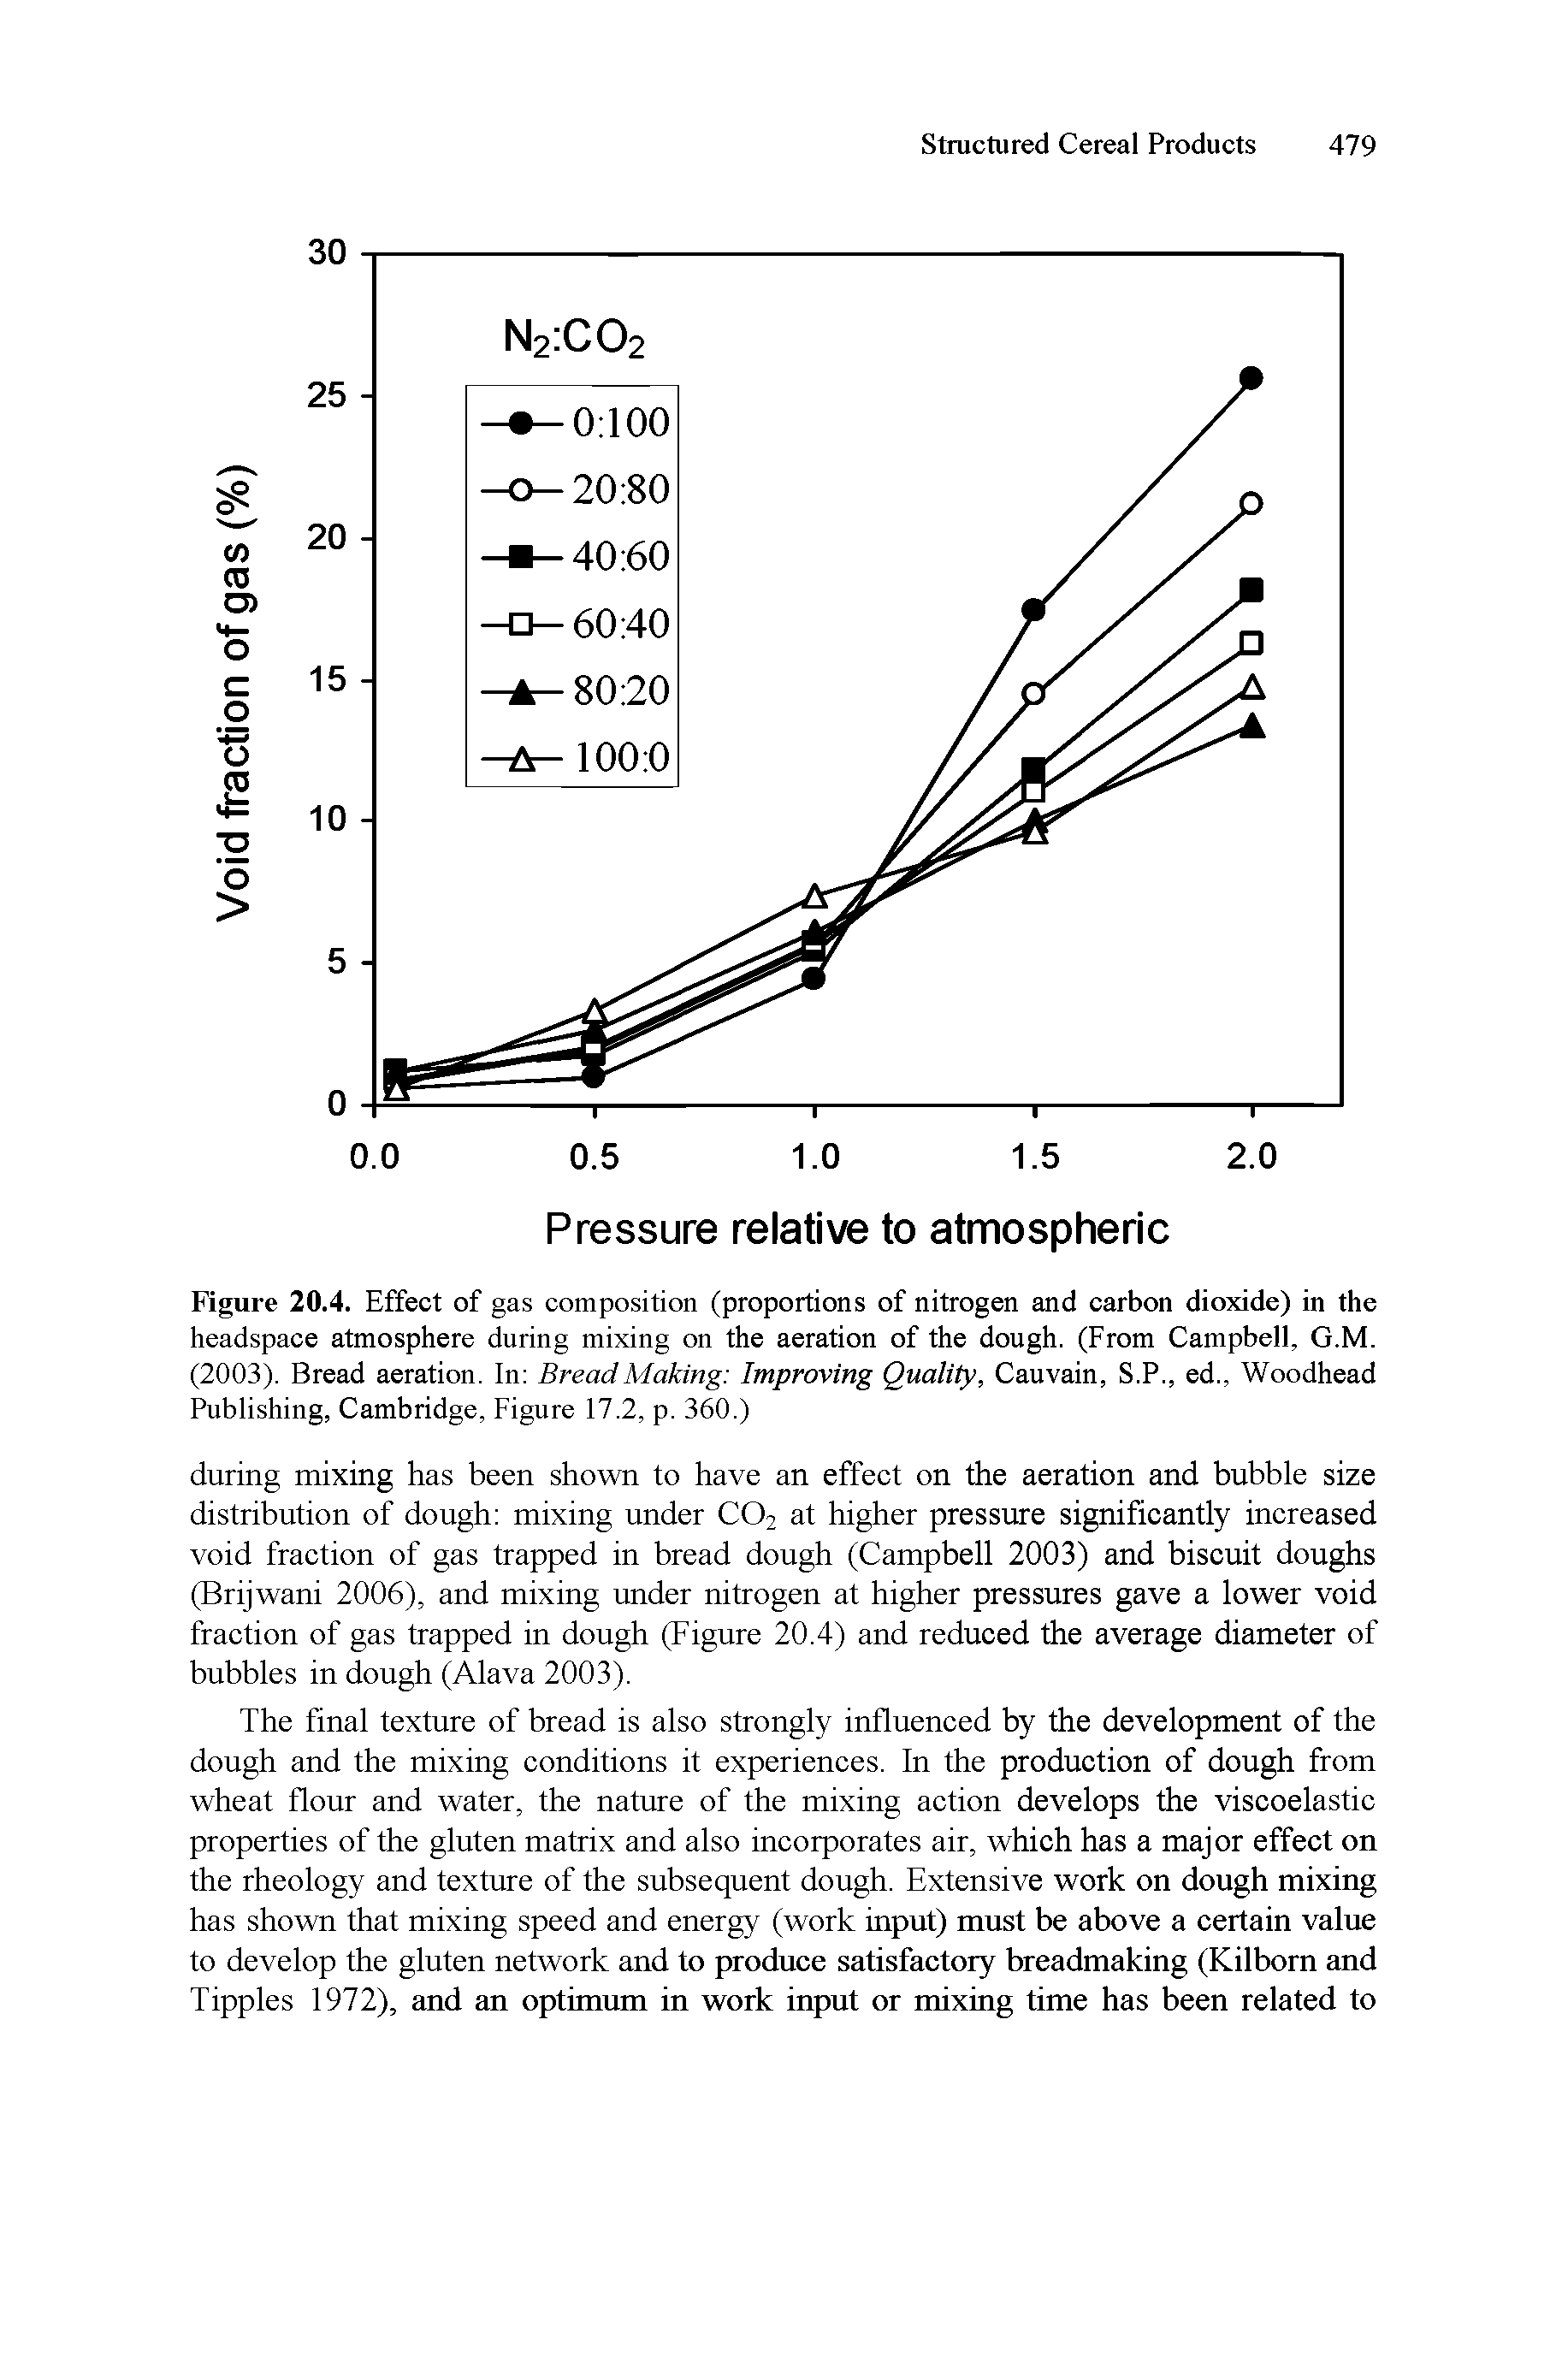 Figure 20.4. Effect of gas composition (proportions of nitrogen and carbon dioxide) in the headspace atmosphere during mixing on the aeration of the dough. (From Campbell, G.M. (2003). Bread aeration. In Bread Making Improving Quality, Cauvain, S.P., ed., Woodhead Publishing, Cambridge, Figure 17.2, p. 360.)...